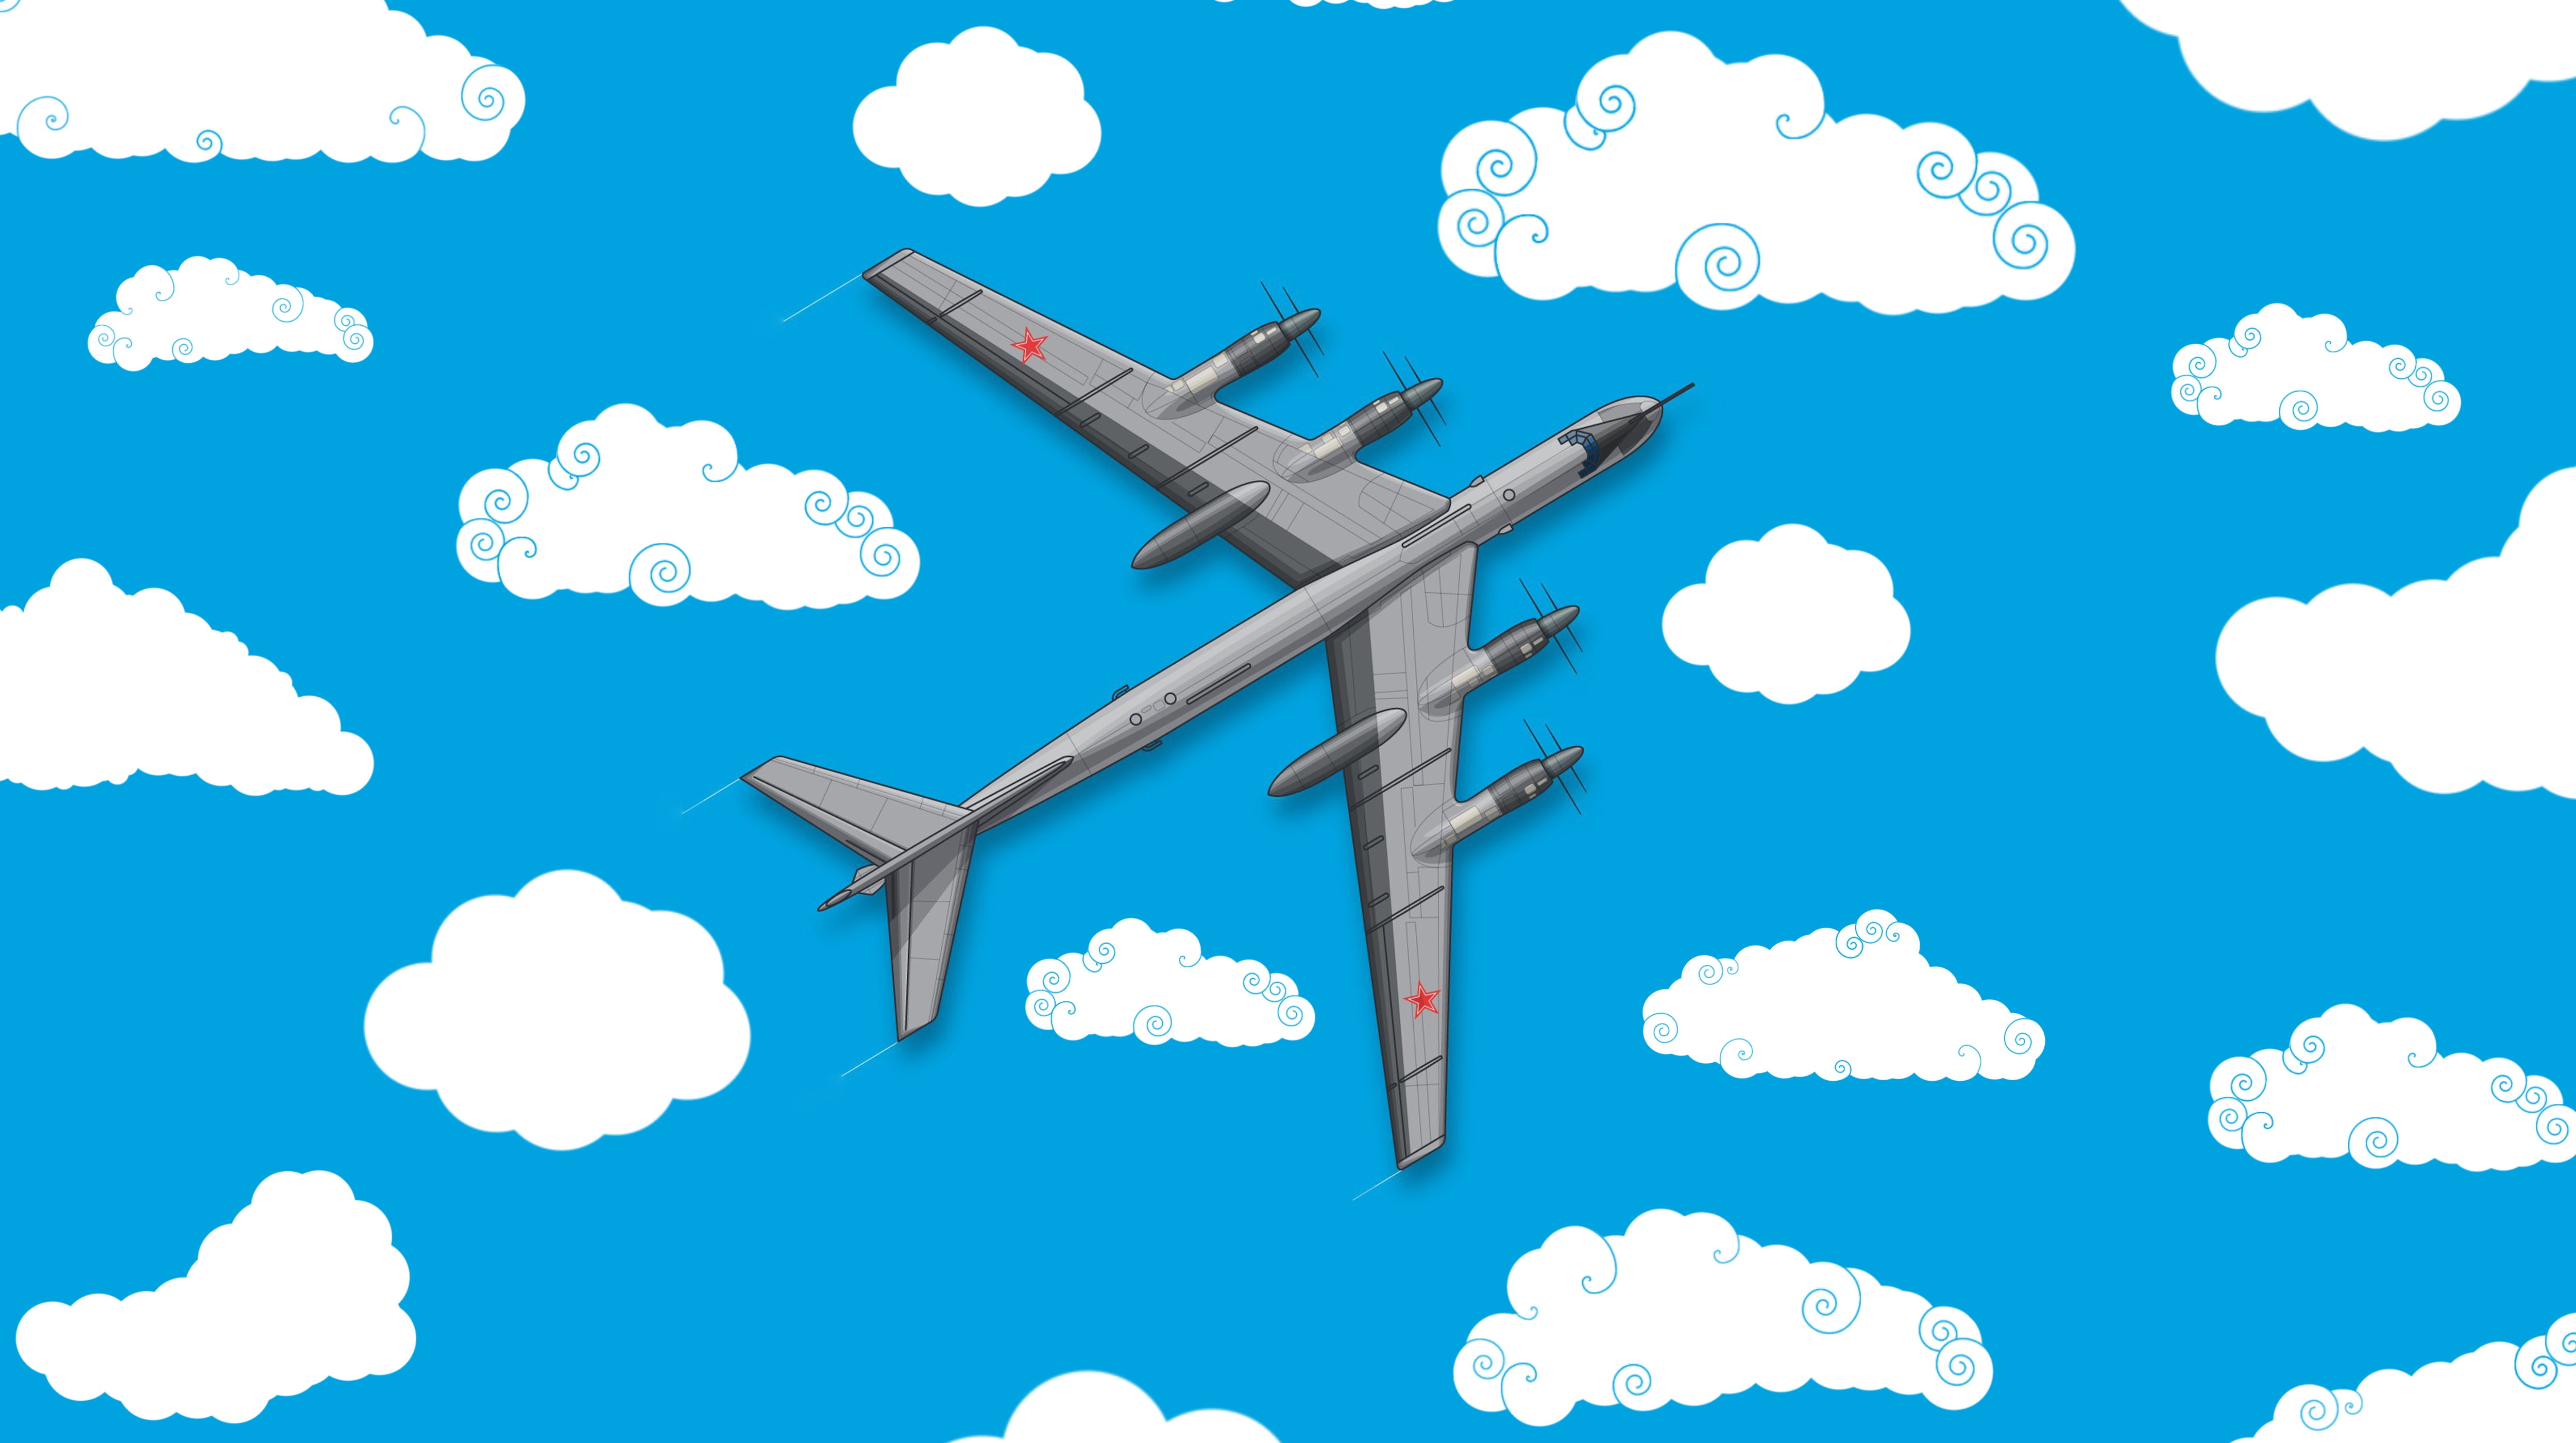 Clouds, Minimalism, The plane, Fighter, Russia, Art, The view from the top